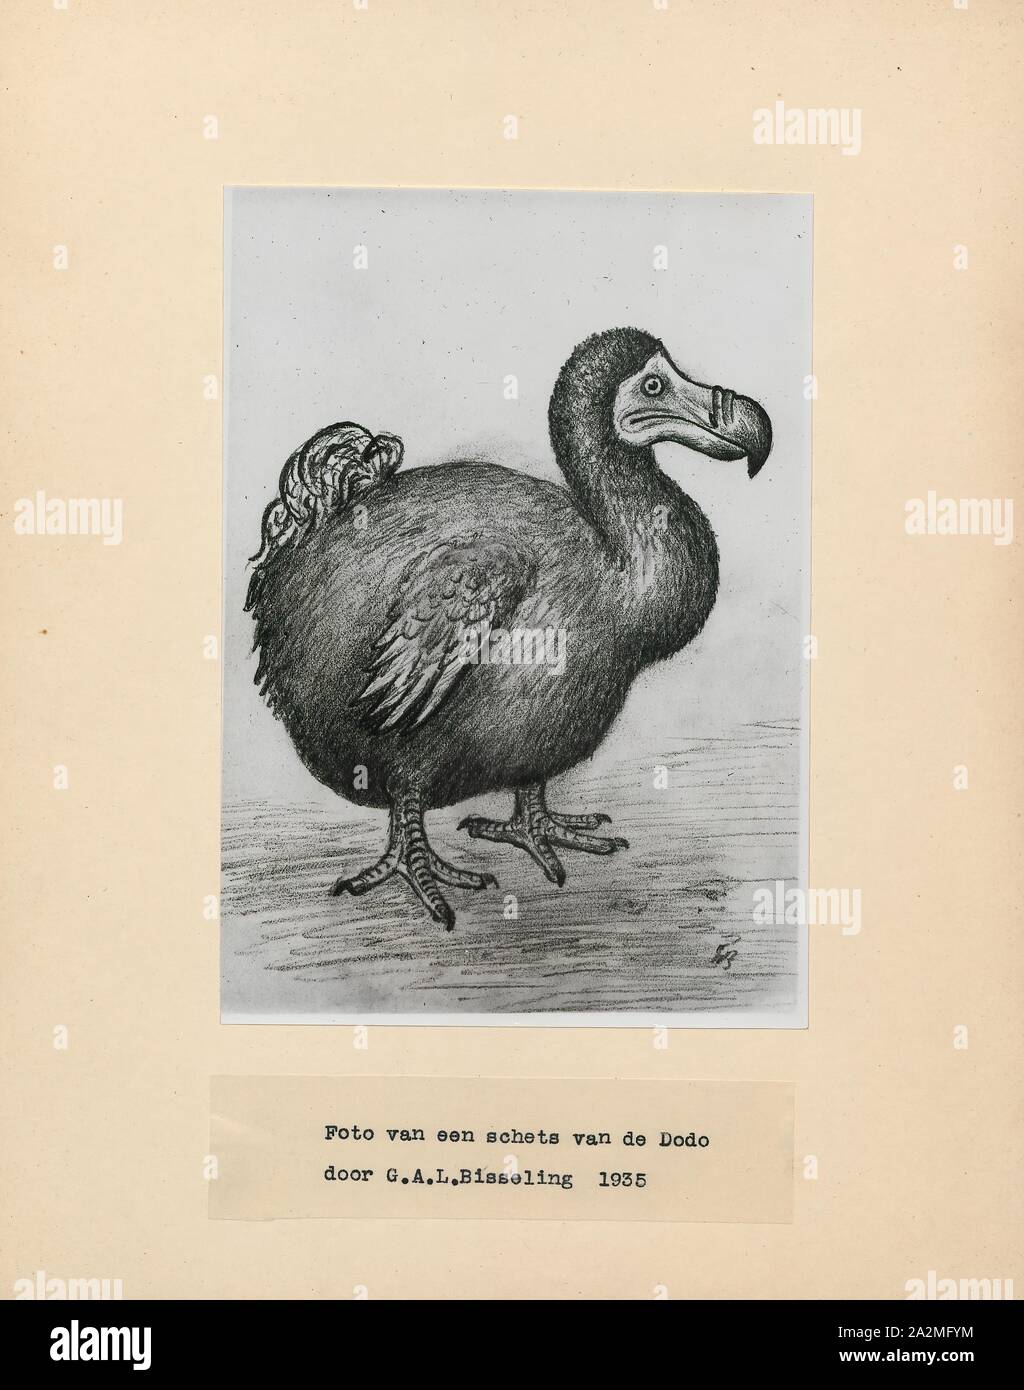 Didus ineptus, Print, The dodo (Raphus cucullatus) is an extinct flightless bird that was endemic to the island of Mauritius, east of Madagascar in the Indian Ocean. The dodo's closest genetic relative was the also-extinct Rodrigues solitaire, the two forming the subfamily Raphinae of the family of pigeons and doves. The closest living relative of the dodo is the Nicobar pigeon. A white dodo was once thought to have existed on the nearby island of Réunion, but this is now thought to have been confusion based on the Réunion ibis and paintings of white dodos Stock Photo